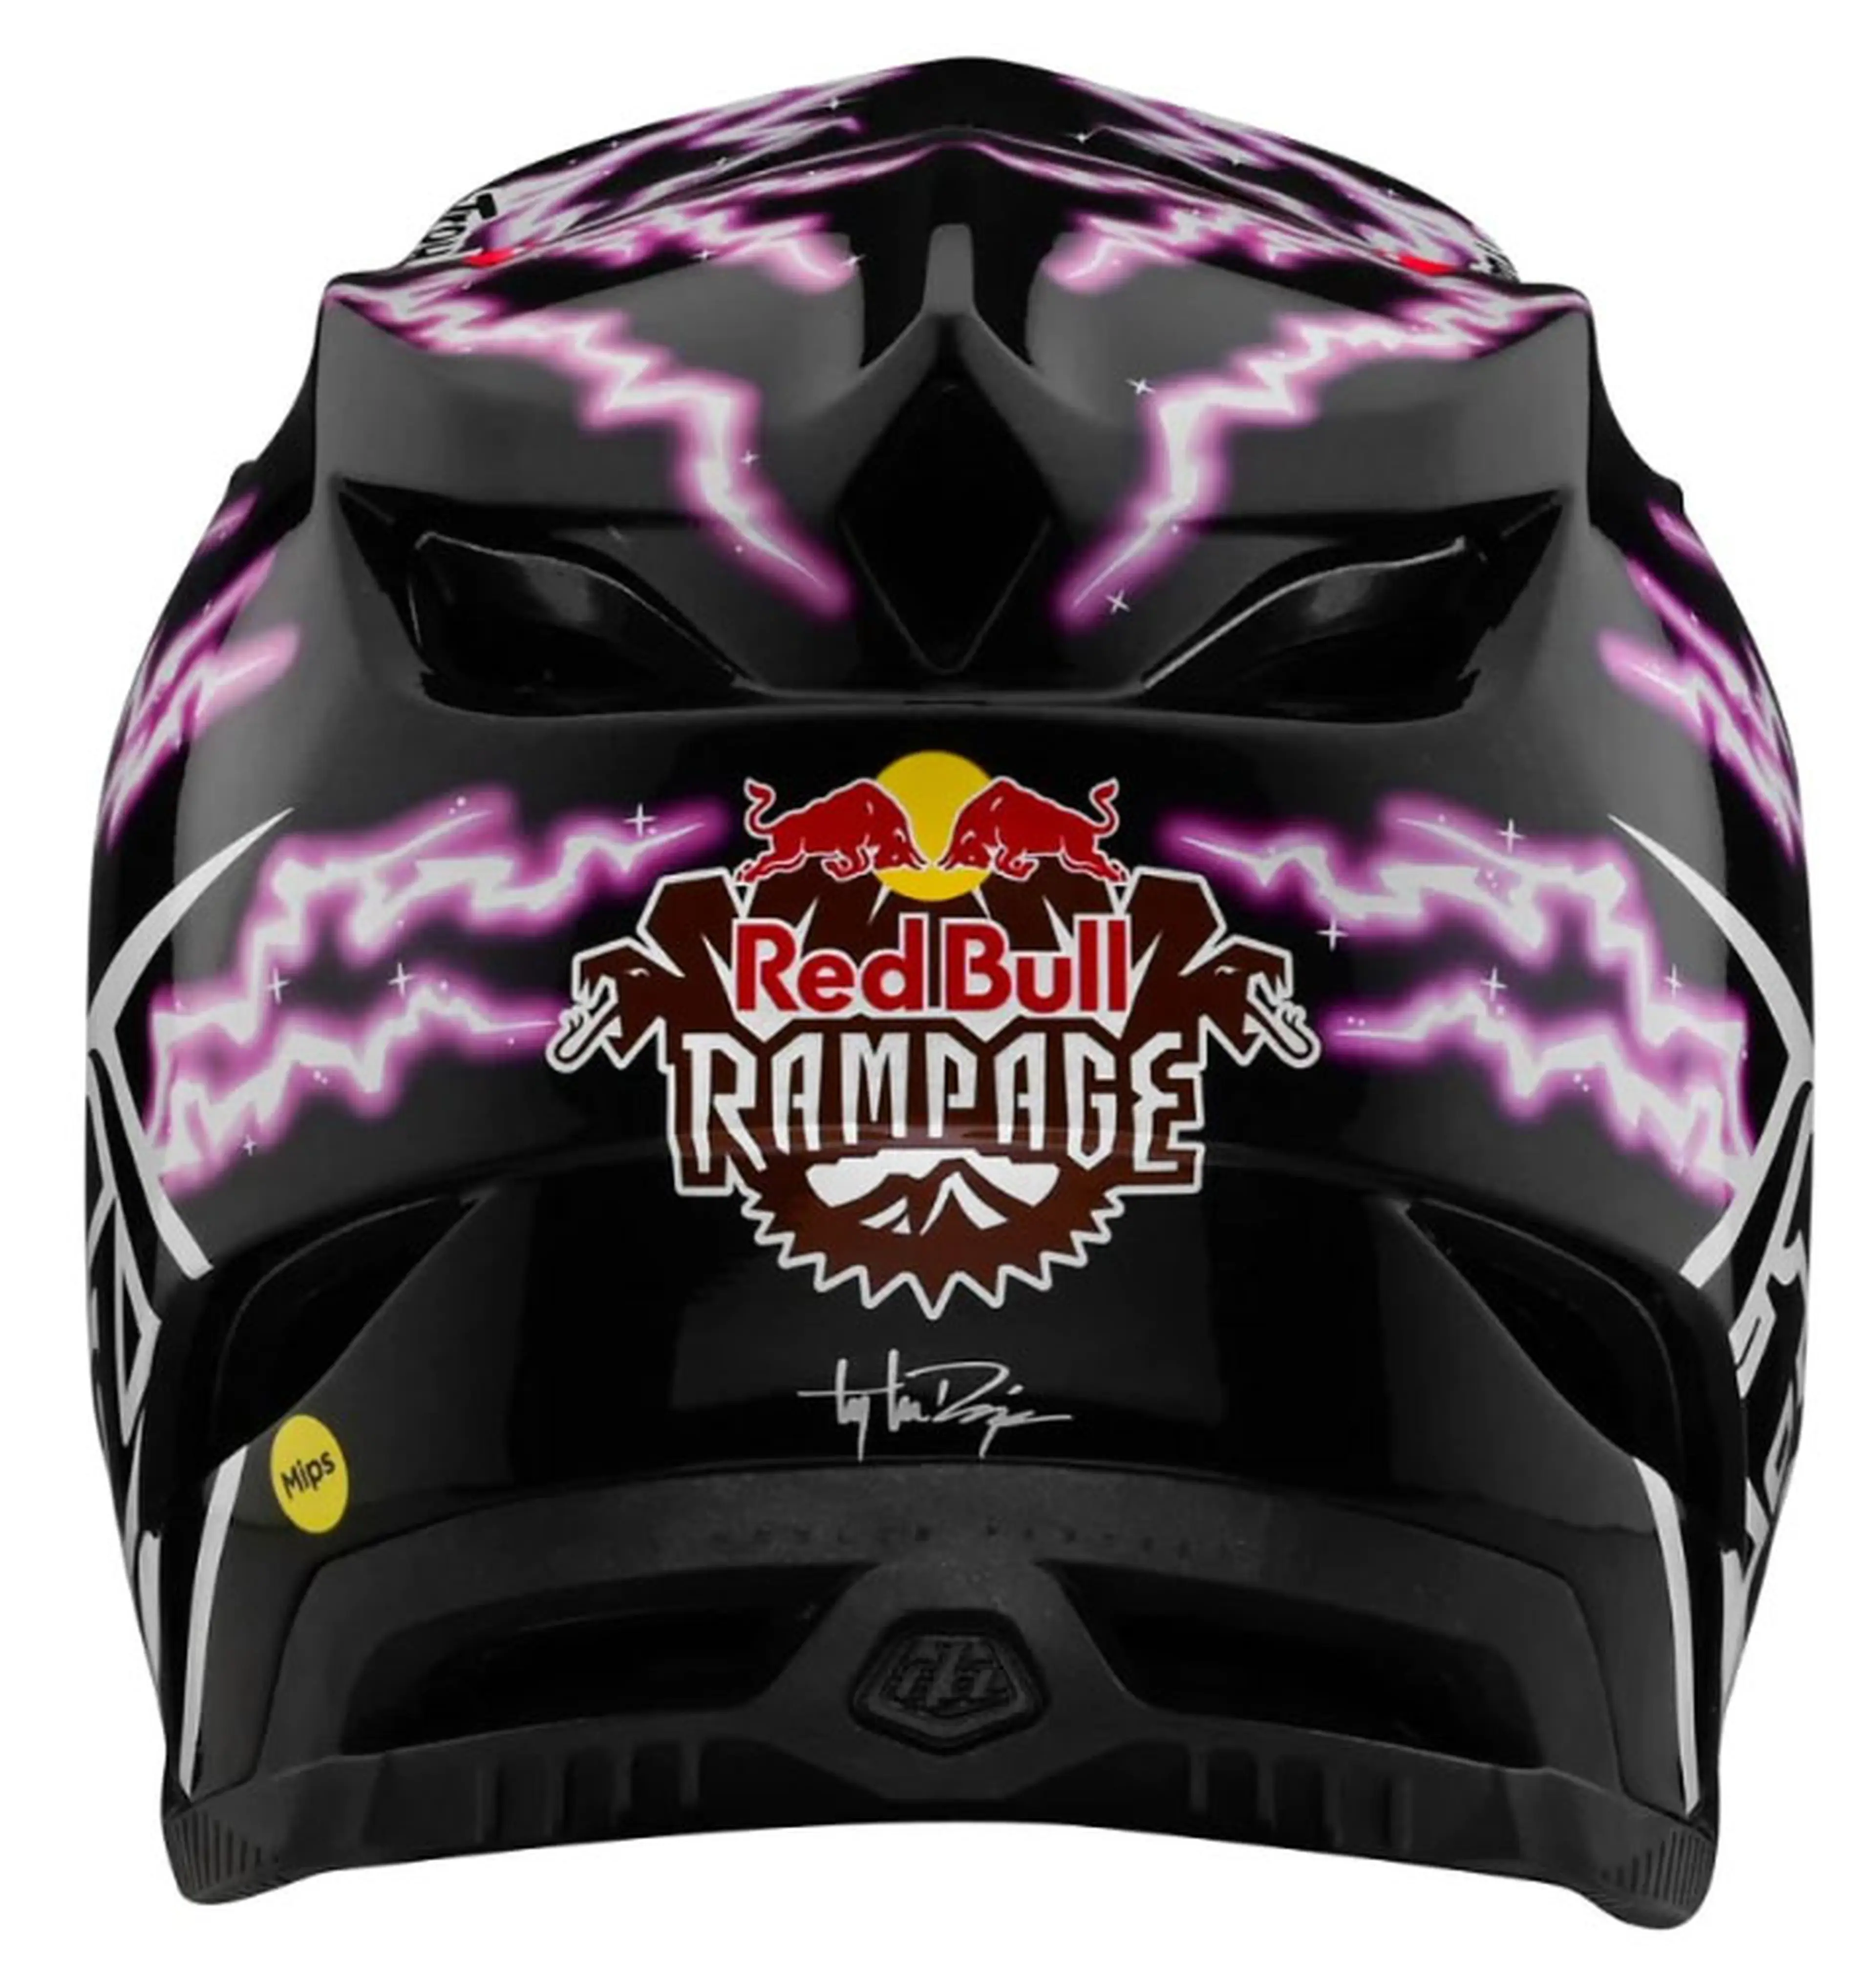 7. Troy Lee Designs X Red Bull Rampage D4 Composite Fullface XL(60-61cm)